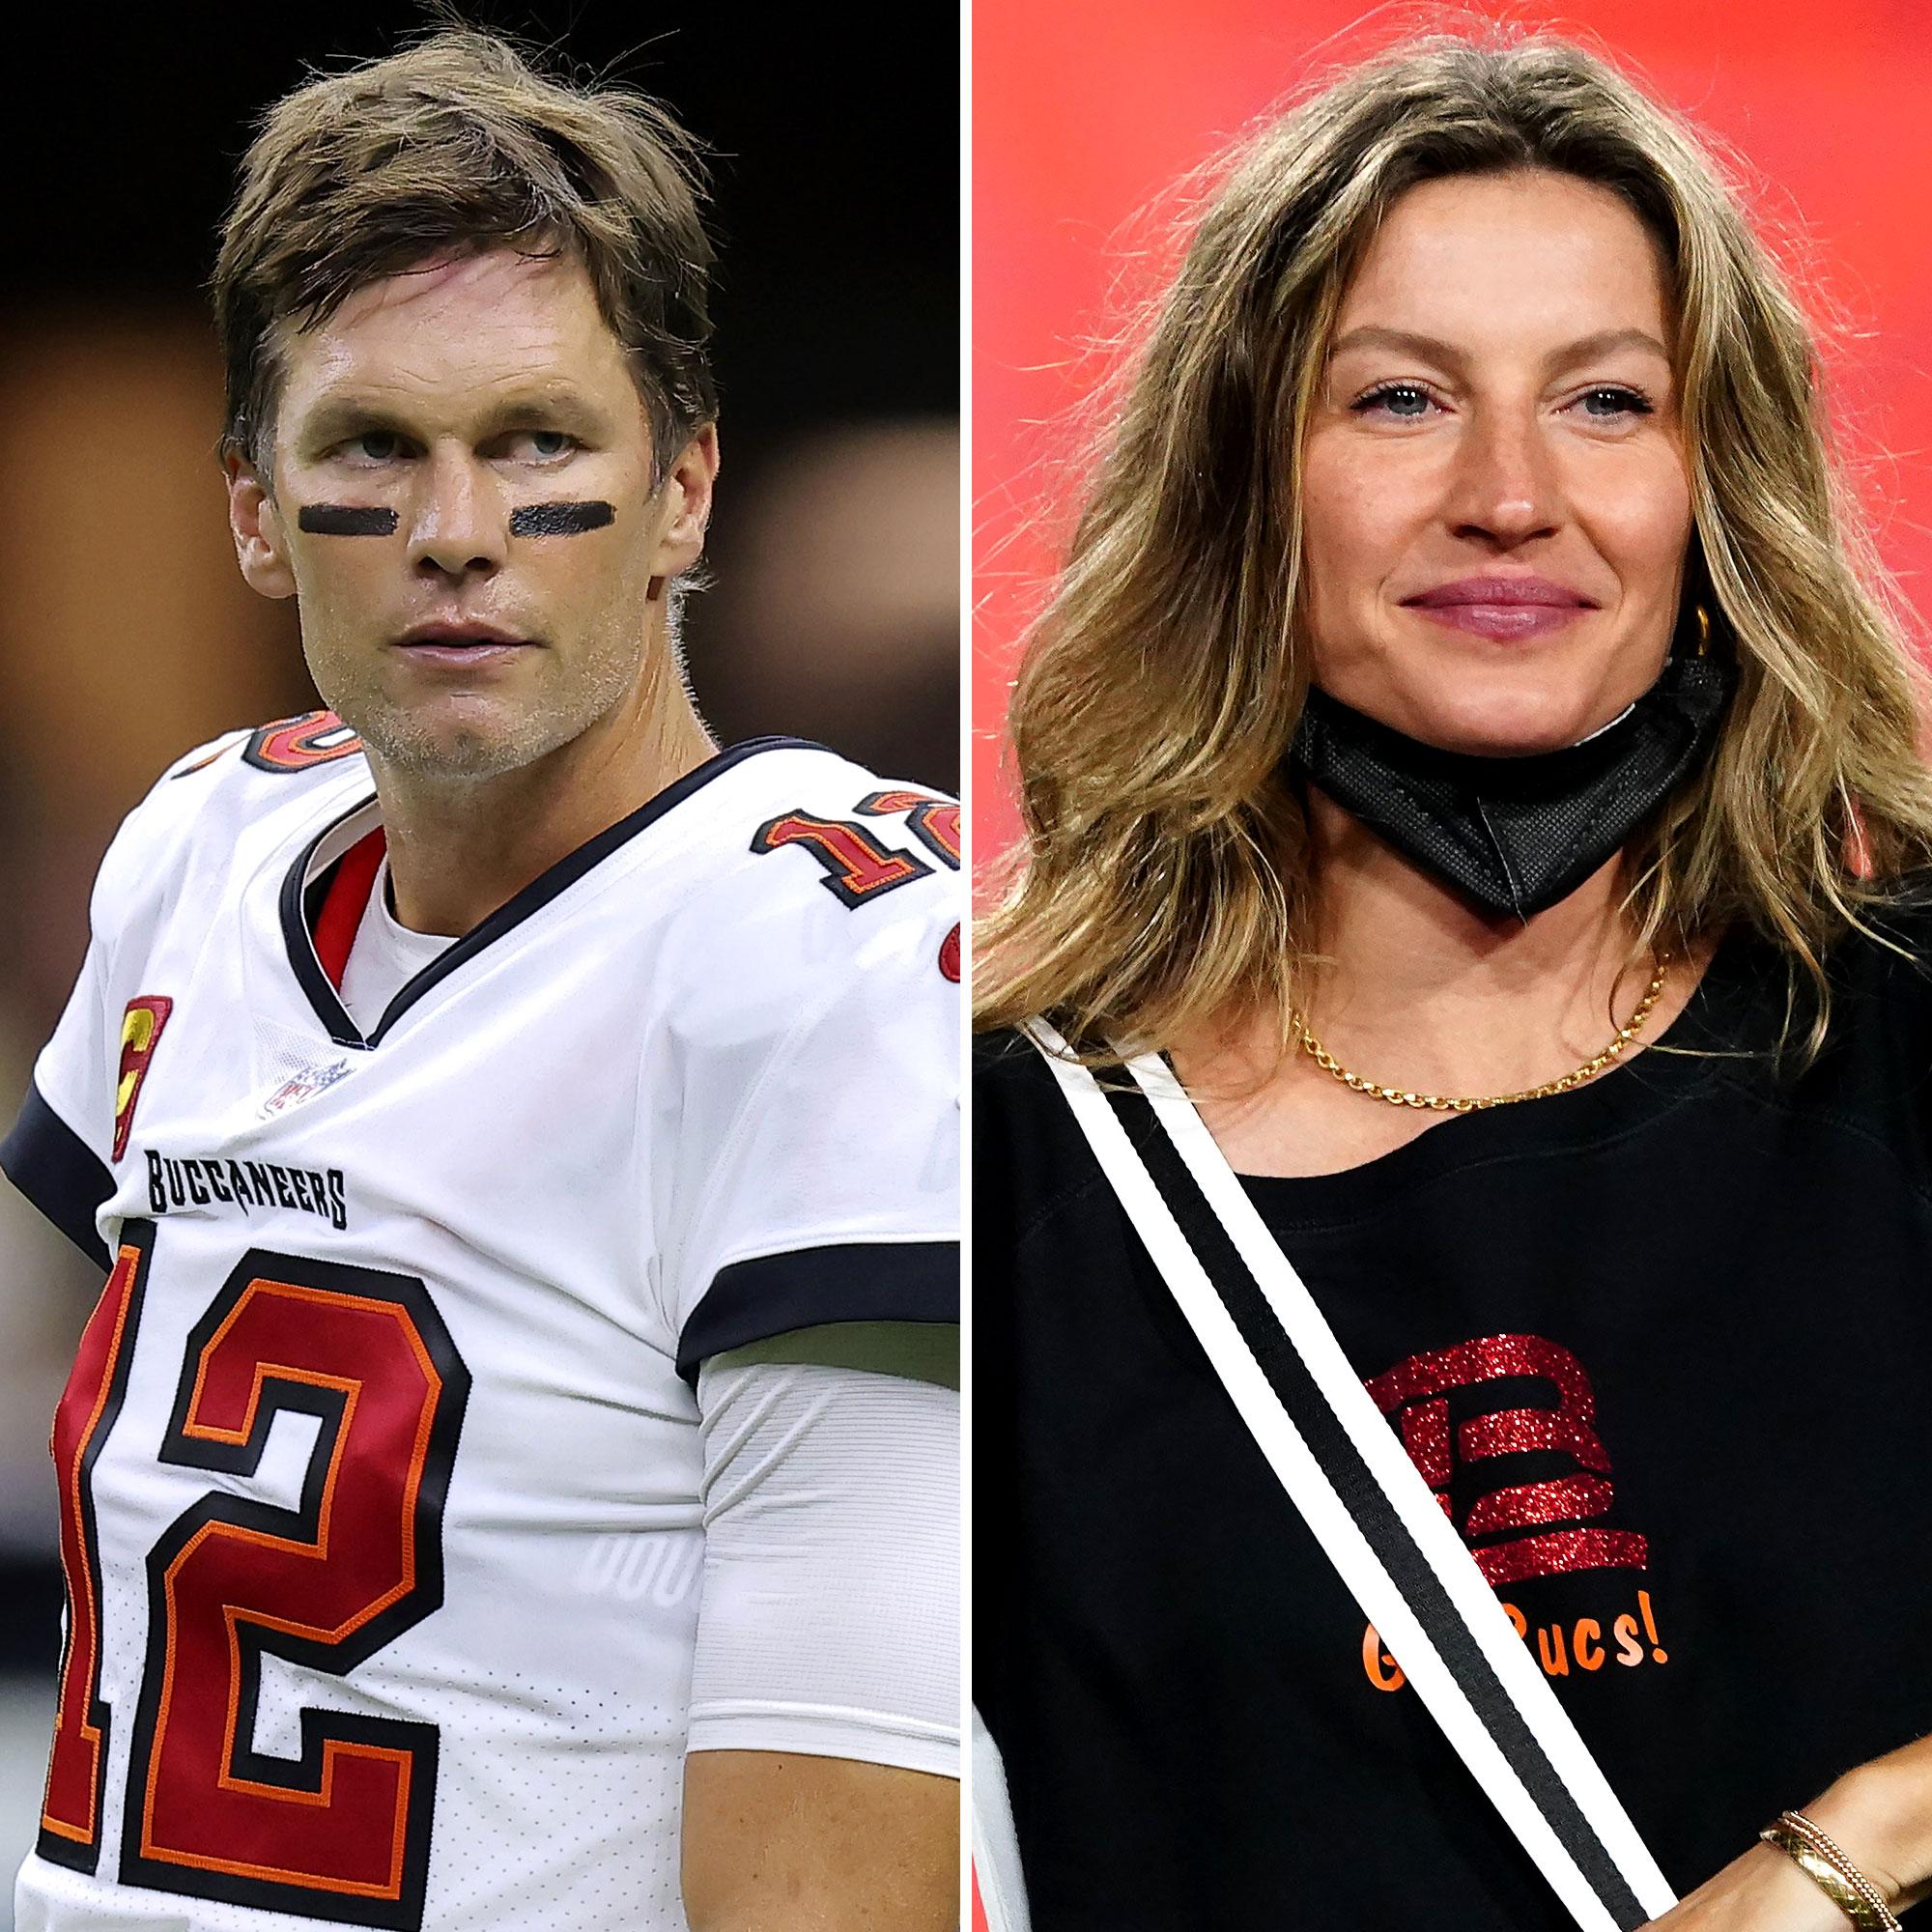 Tom Brady and Gisele Bundchen A Timeline of Their Relationship pic